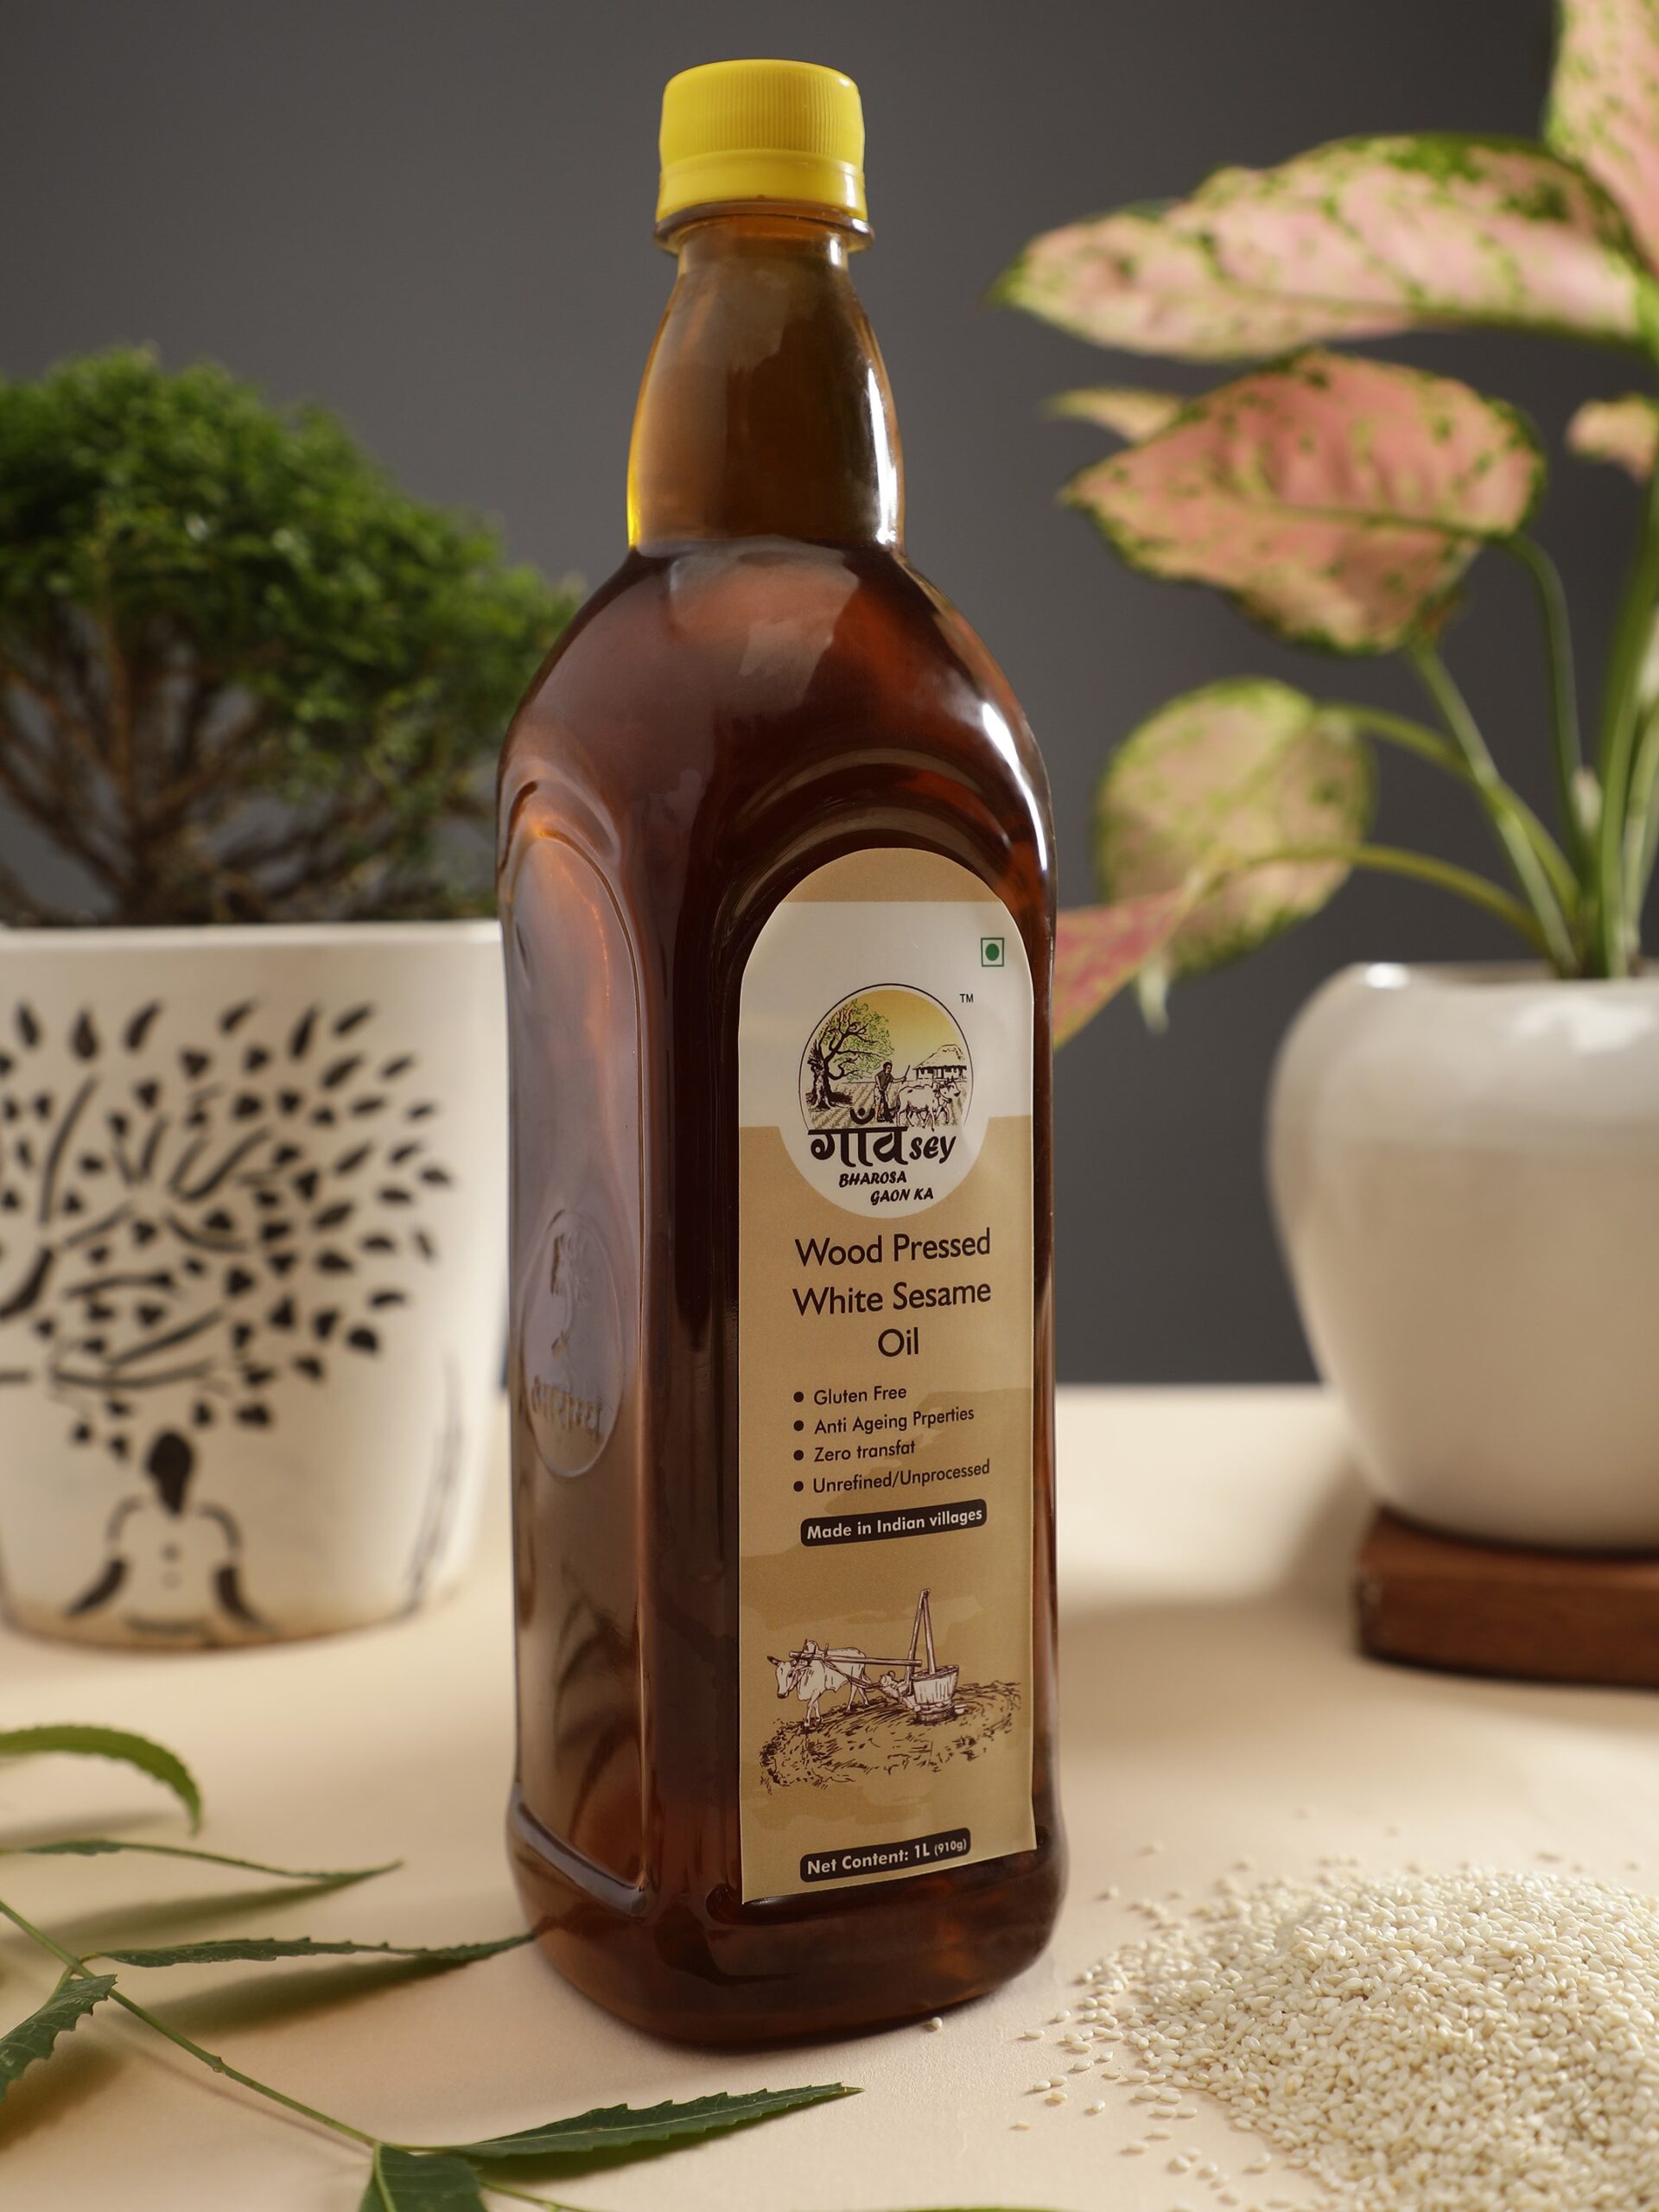 Wood-Pressed White Sesame Oil in Stock for Sale